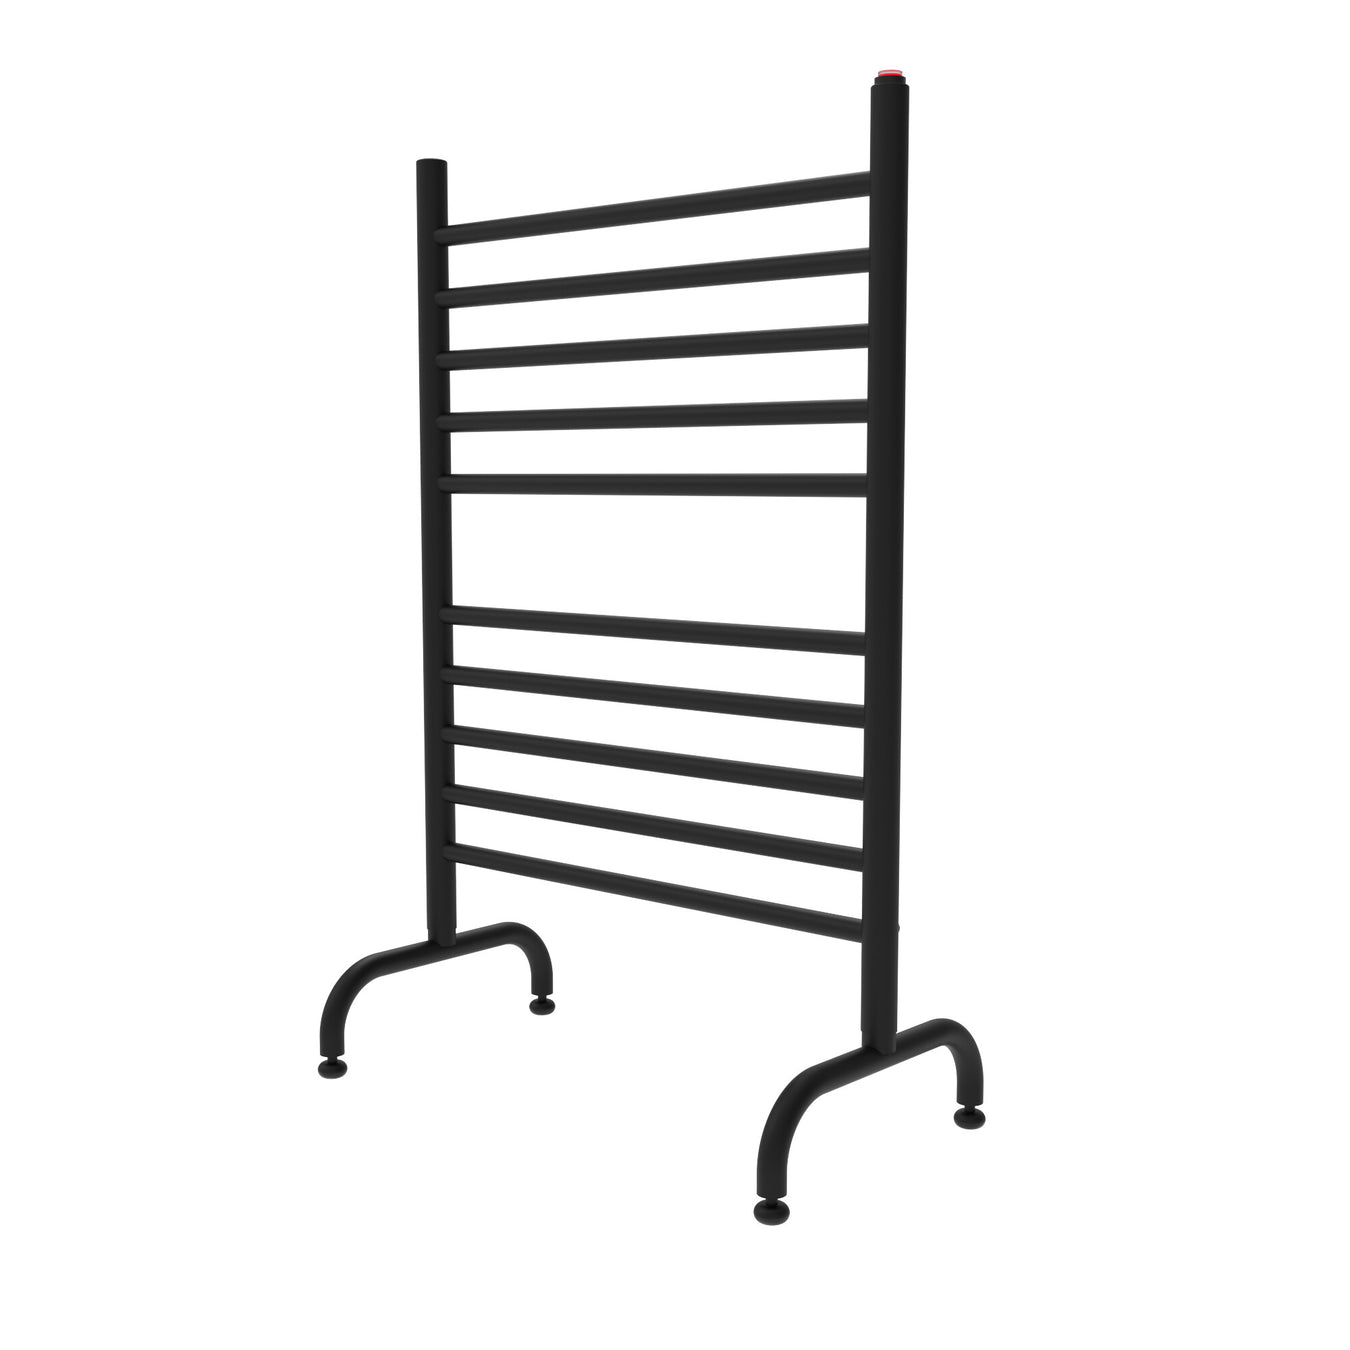 Amba Products Solo Collection SAFS-24 Towel Warmers